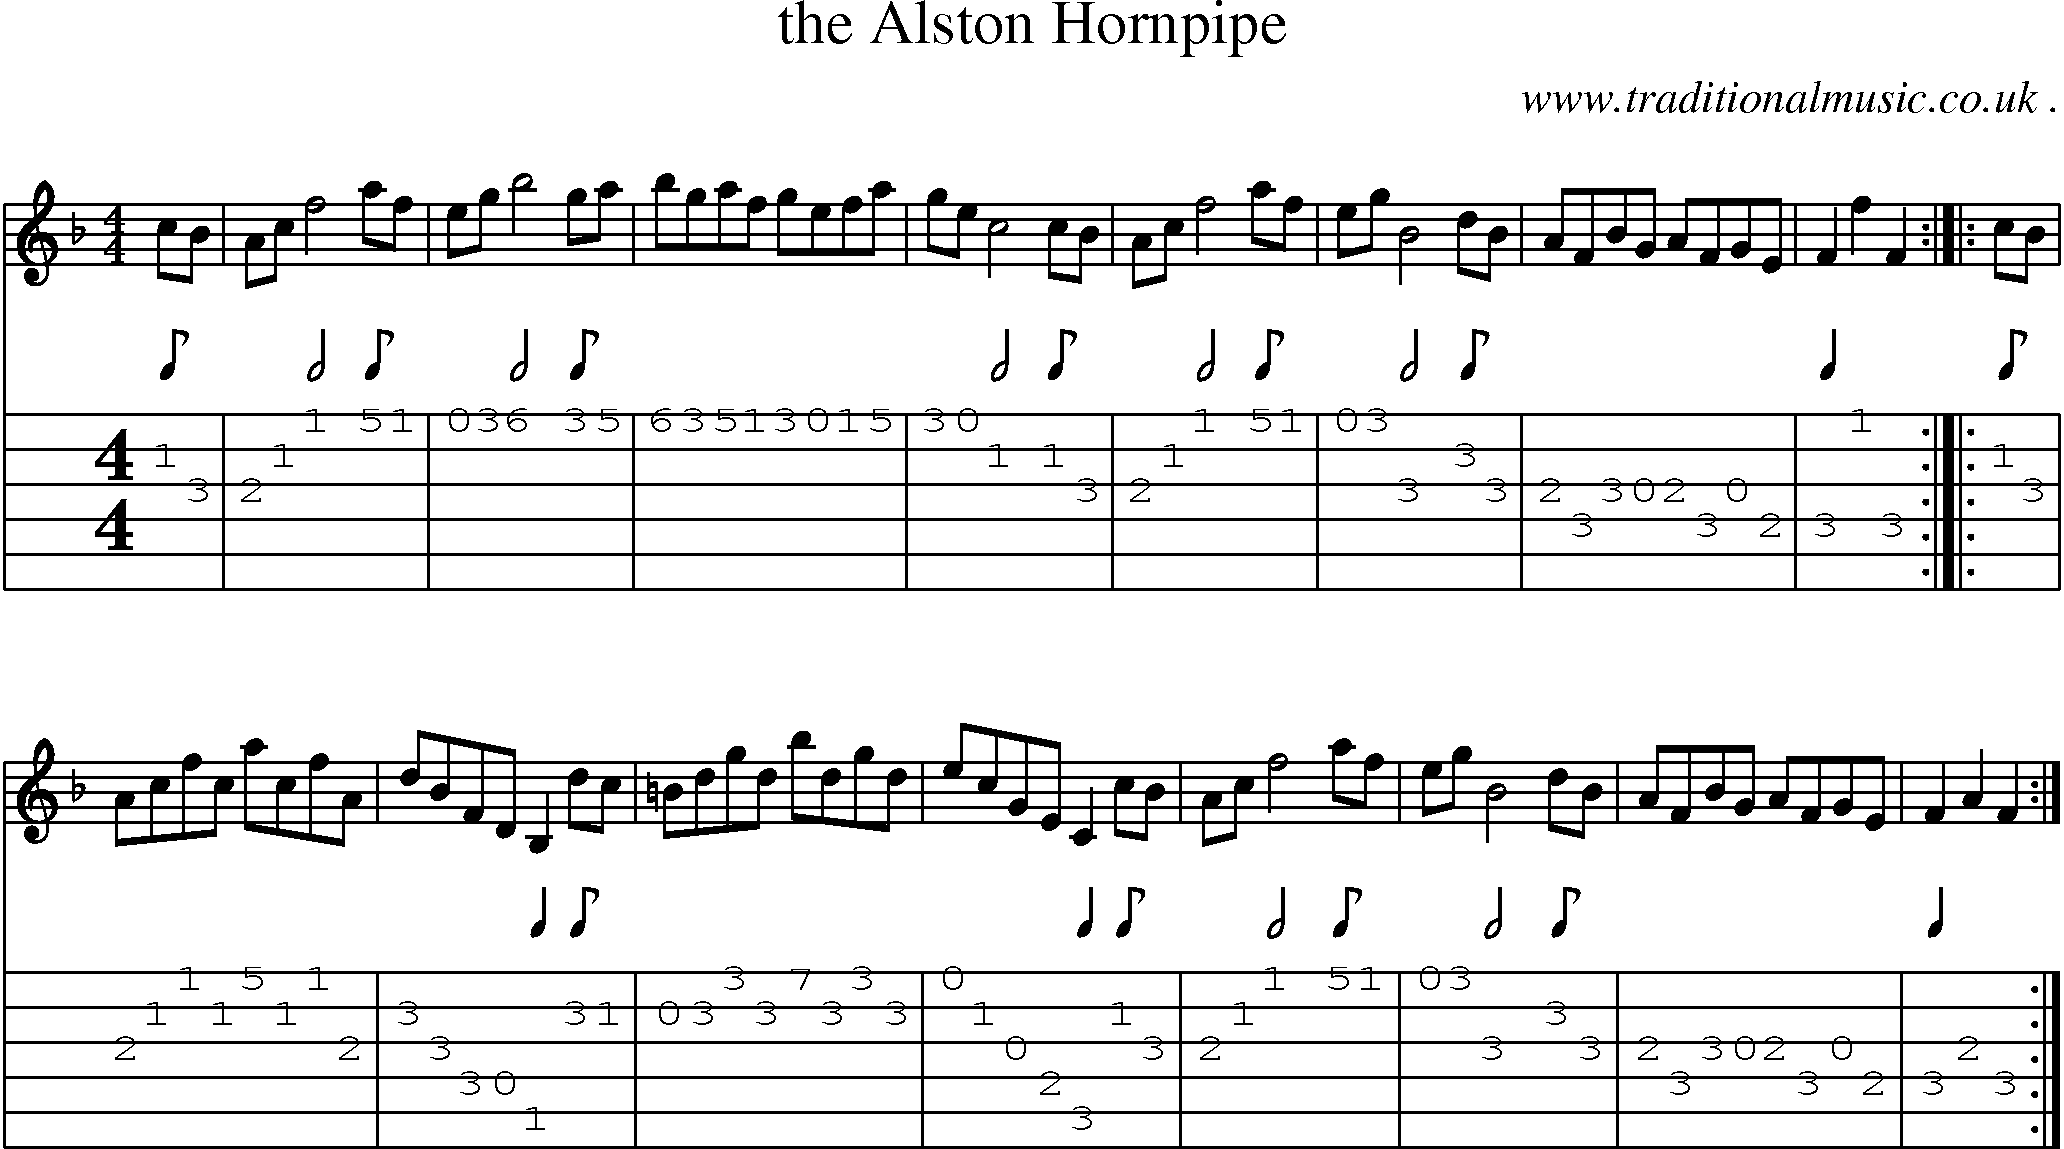 Sheet-Music and Guitar Tabs for The Alston Hornpipe